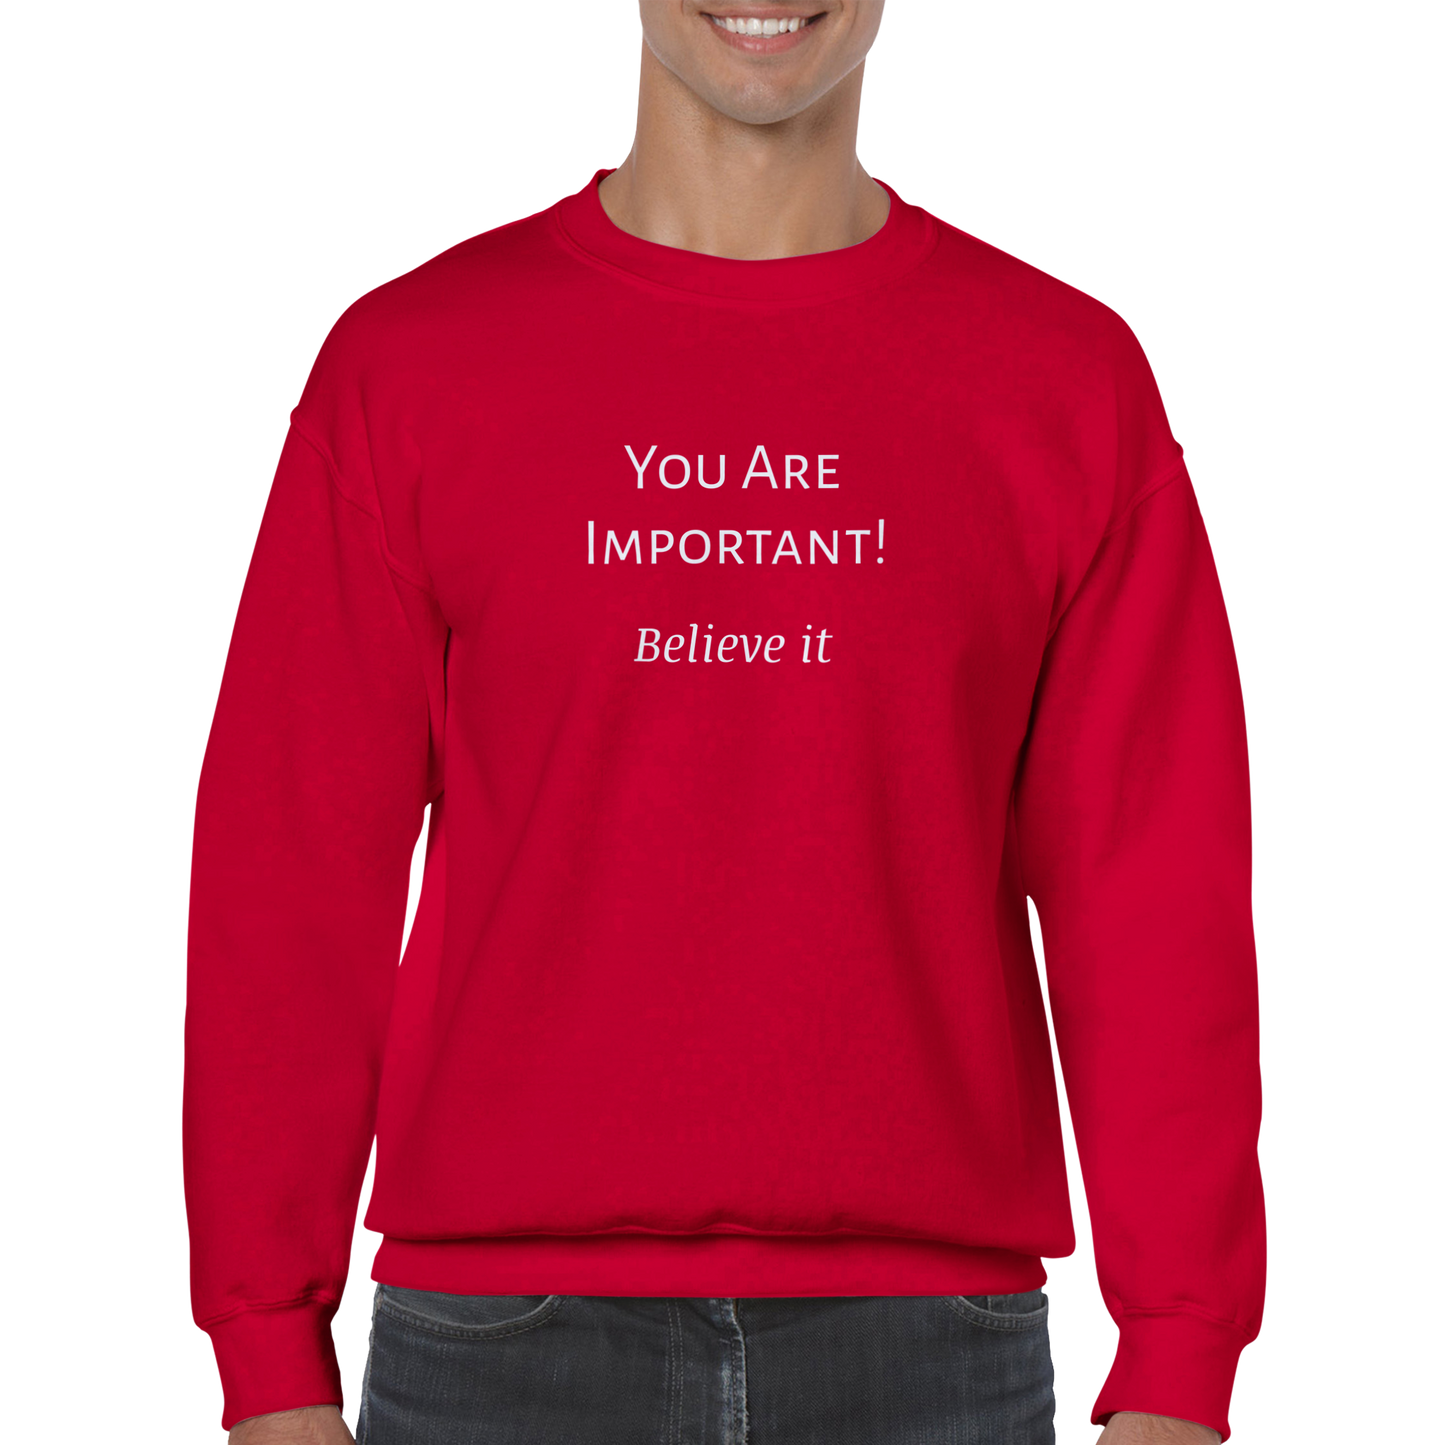 You Are Important! Classic Unisex Crewneck Sweatshirt. Wear it and share it forward.